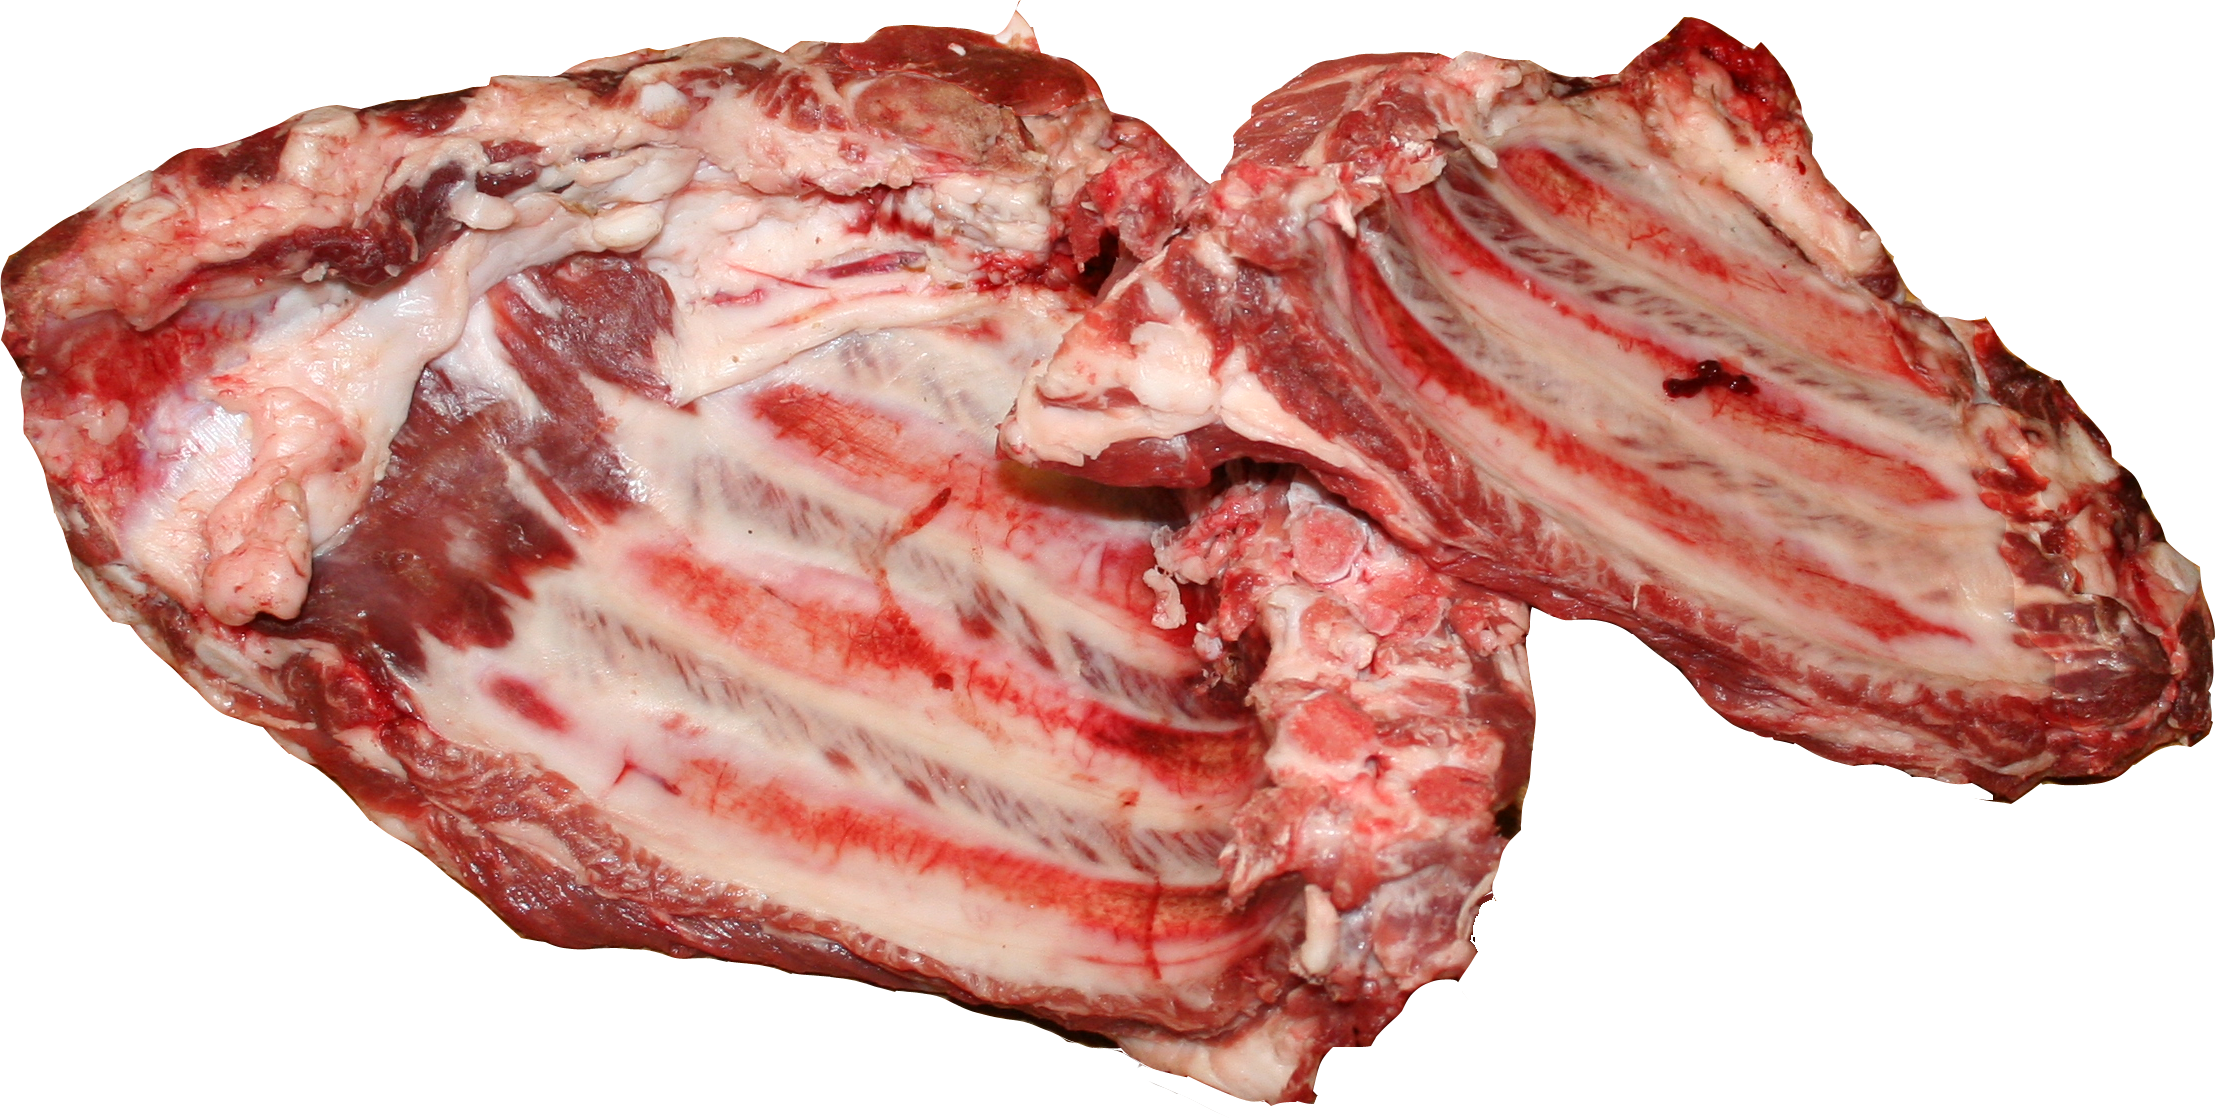 Meat PNG image - Meat PNG